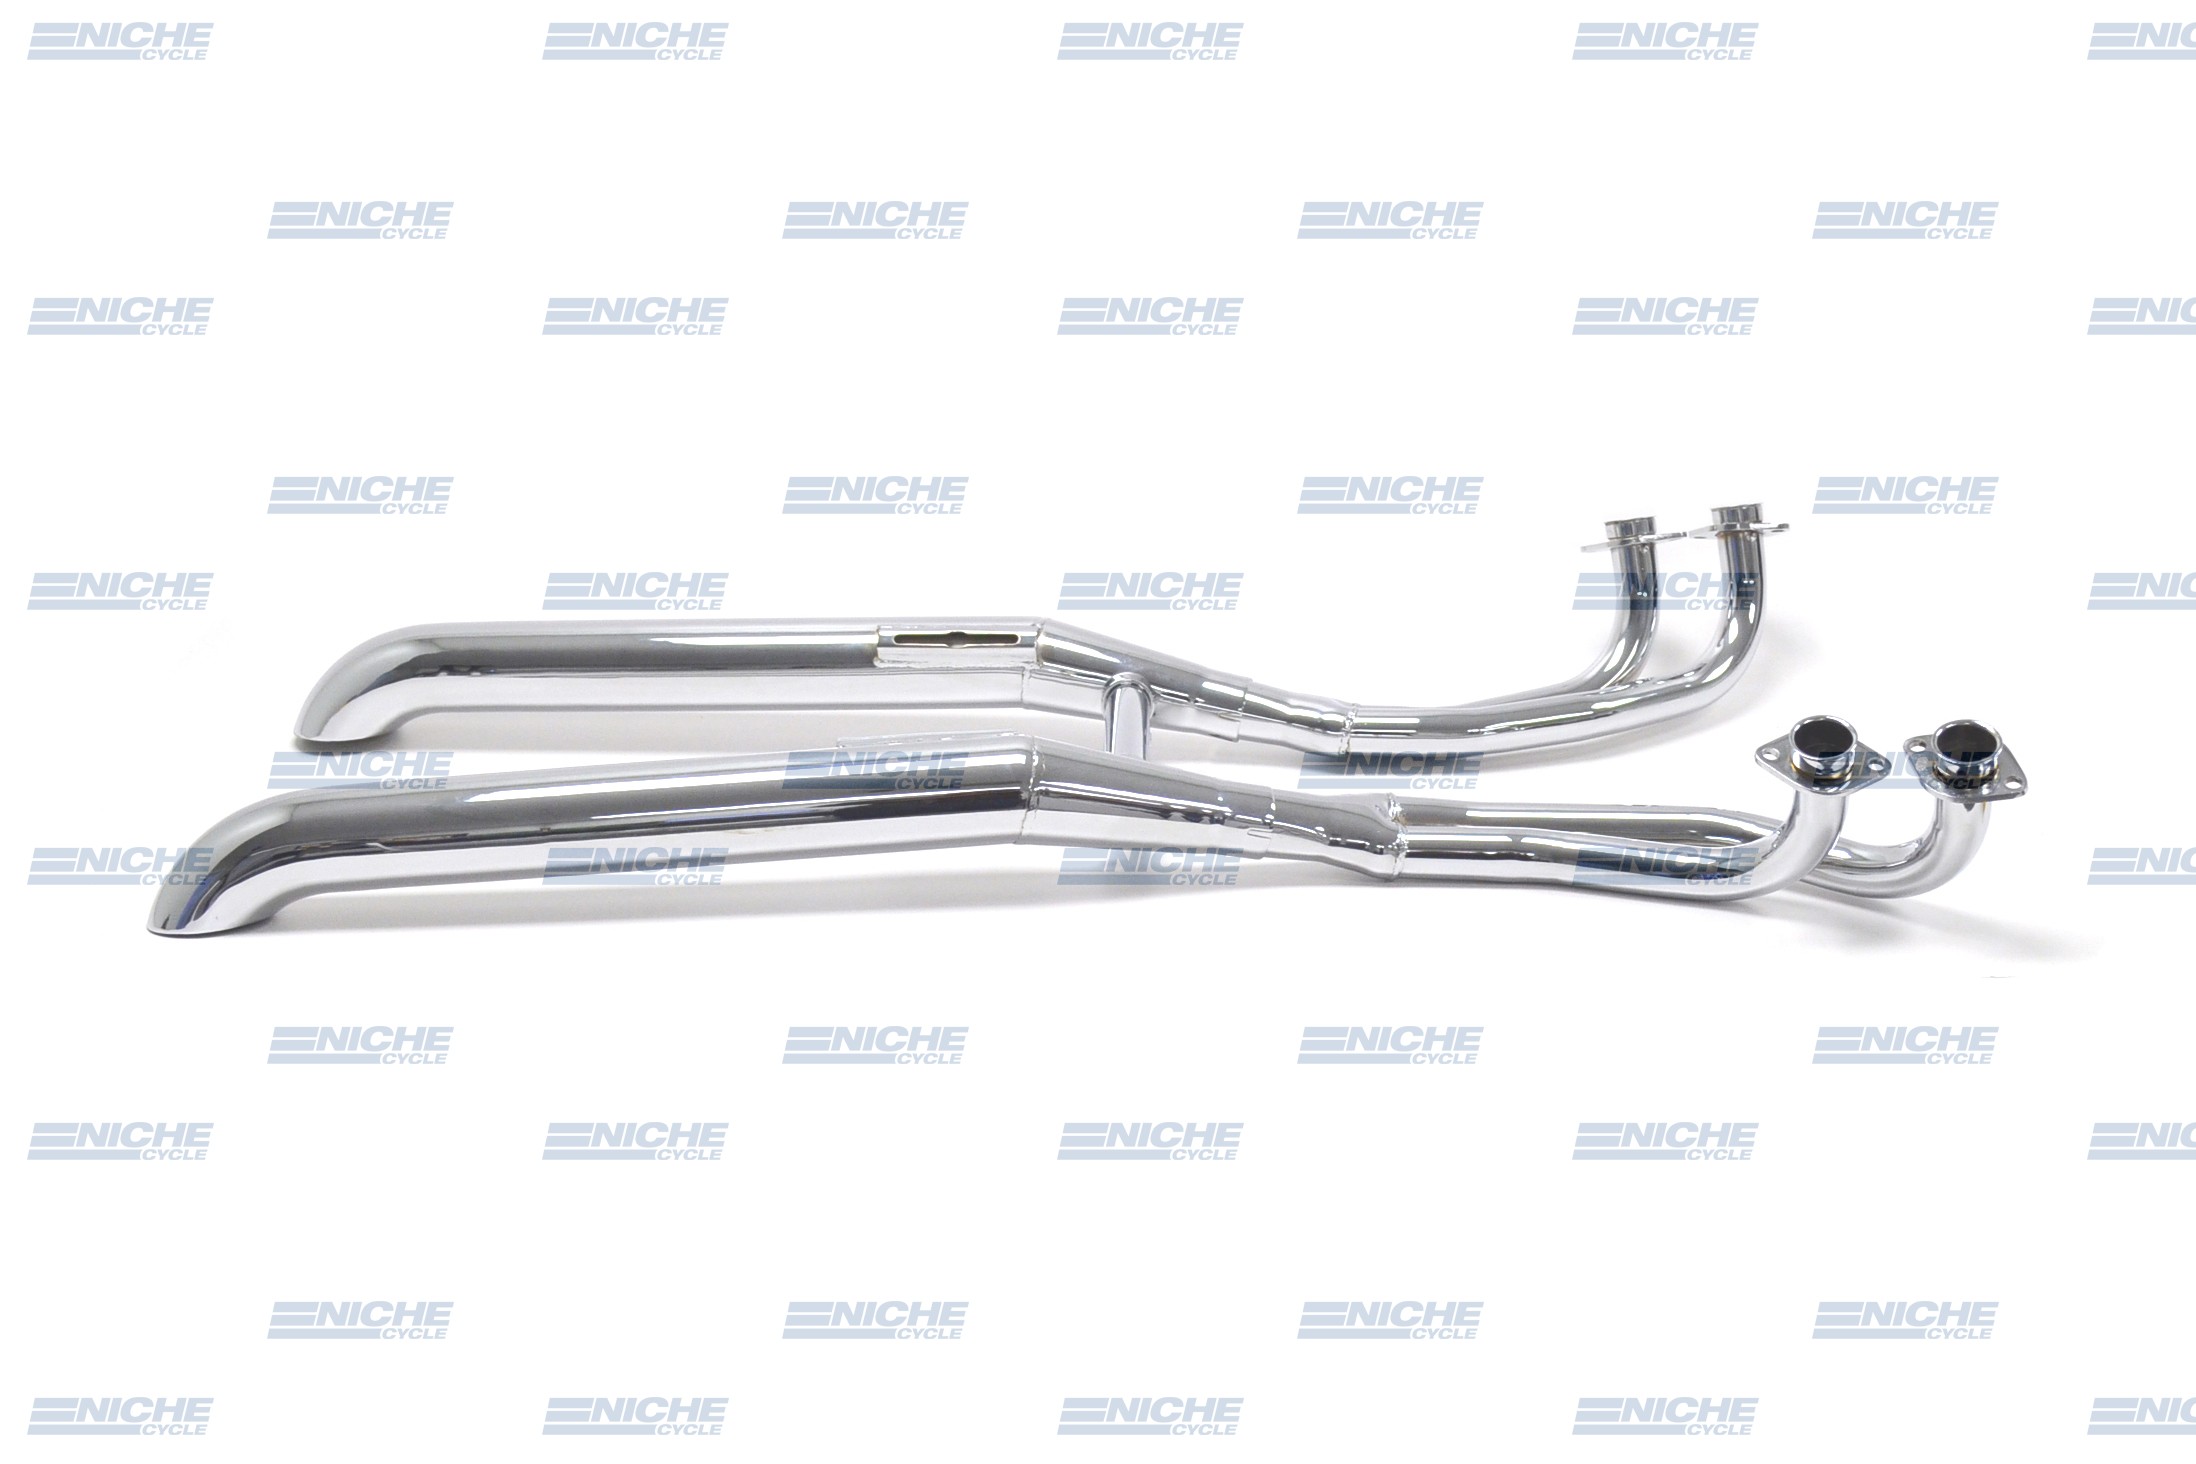 Honda GL1000 Gold Wing 75-79 4-Into-2 Chrome Turndown Exhaust System 001-1718